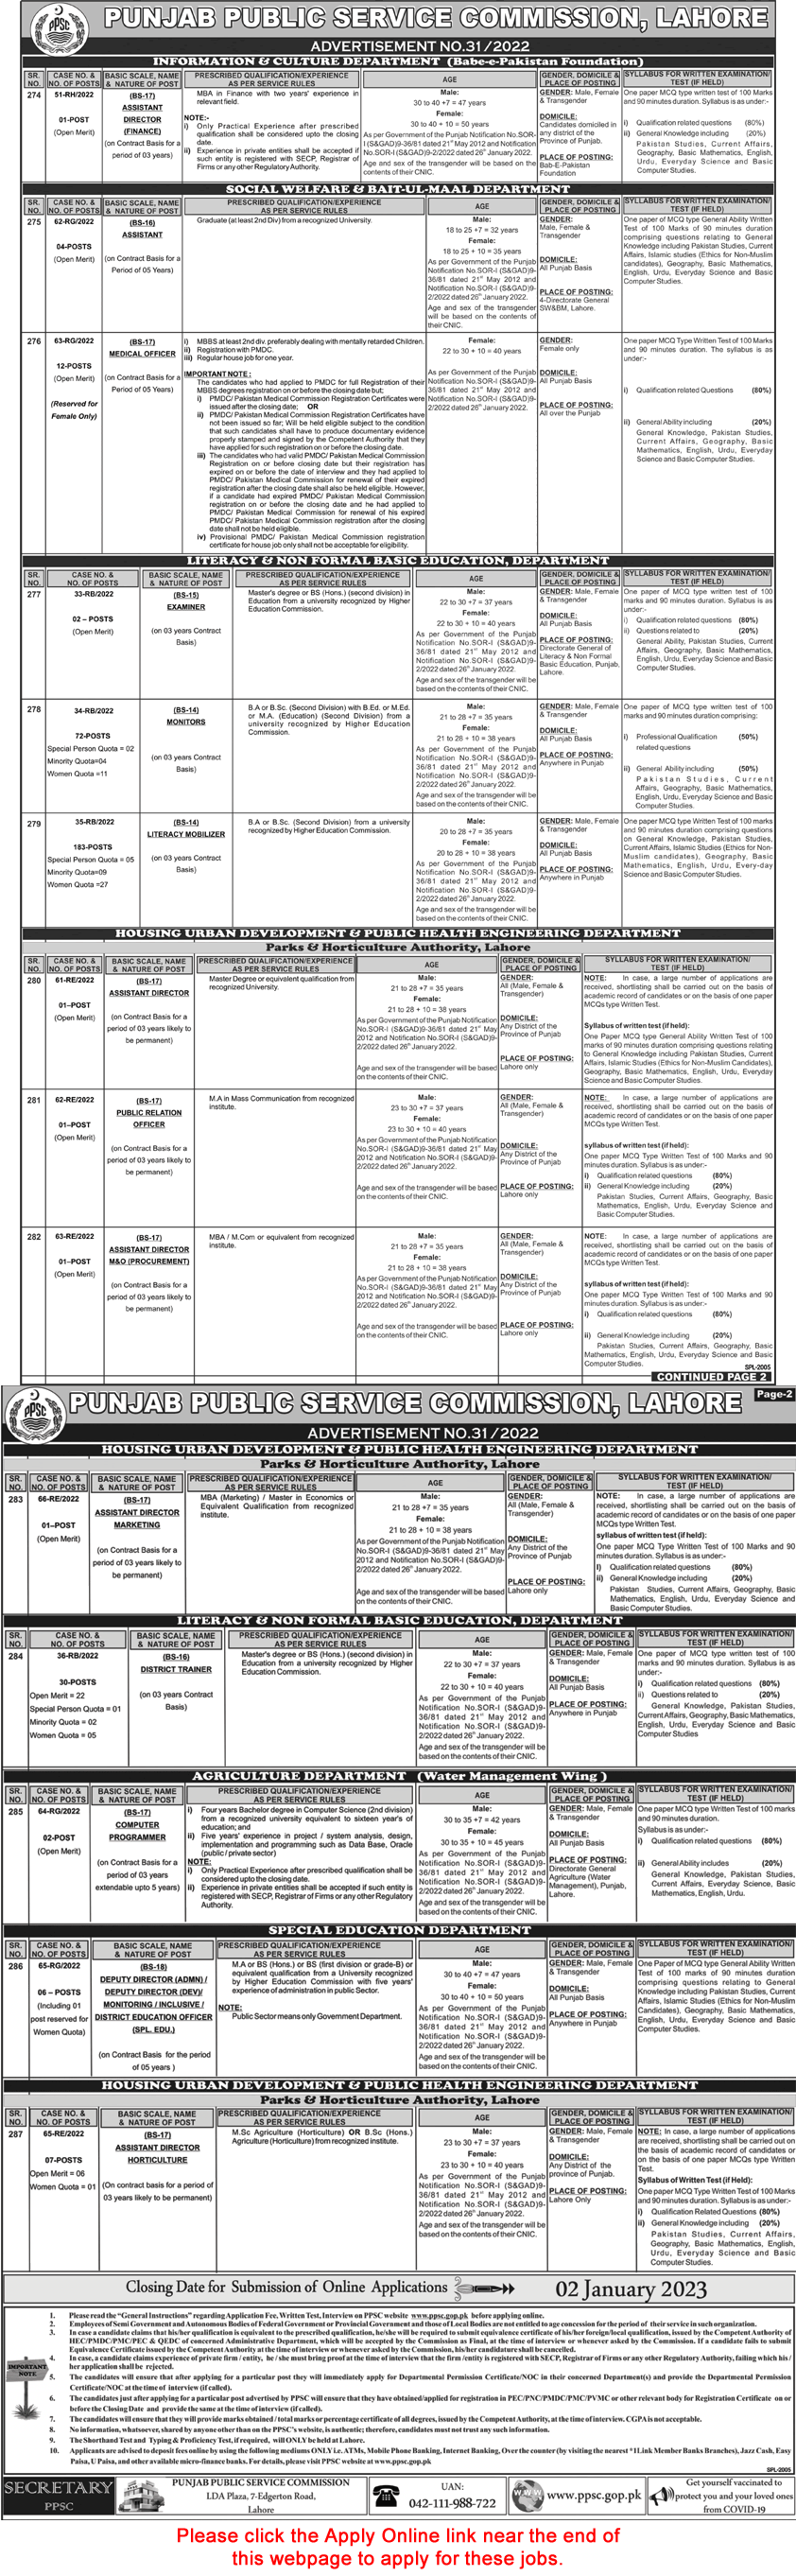 PPSC Jobs December 2022 Online Apply PPSC Consolidated Advertisement No 31/2022 Latest